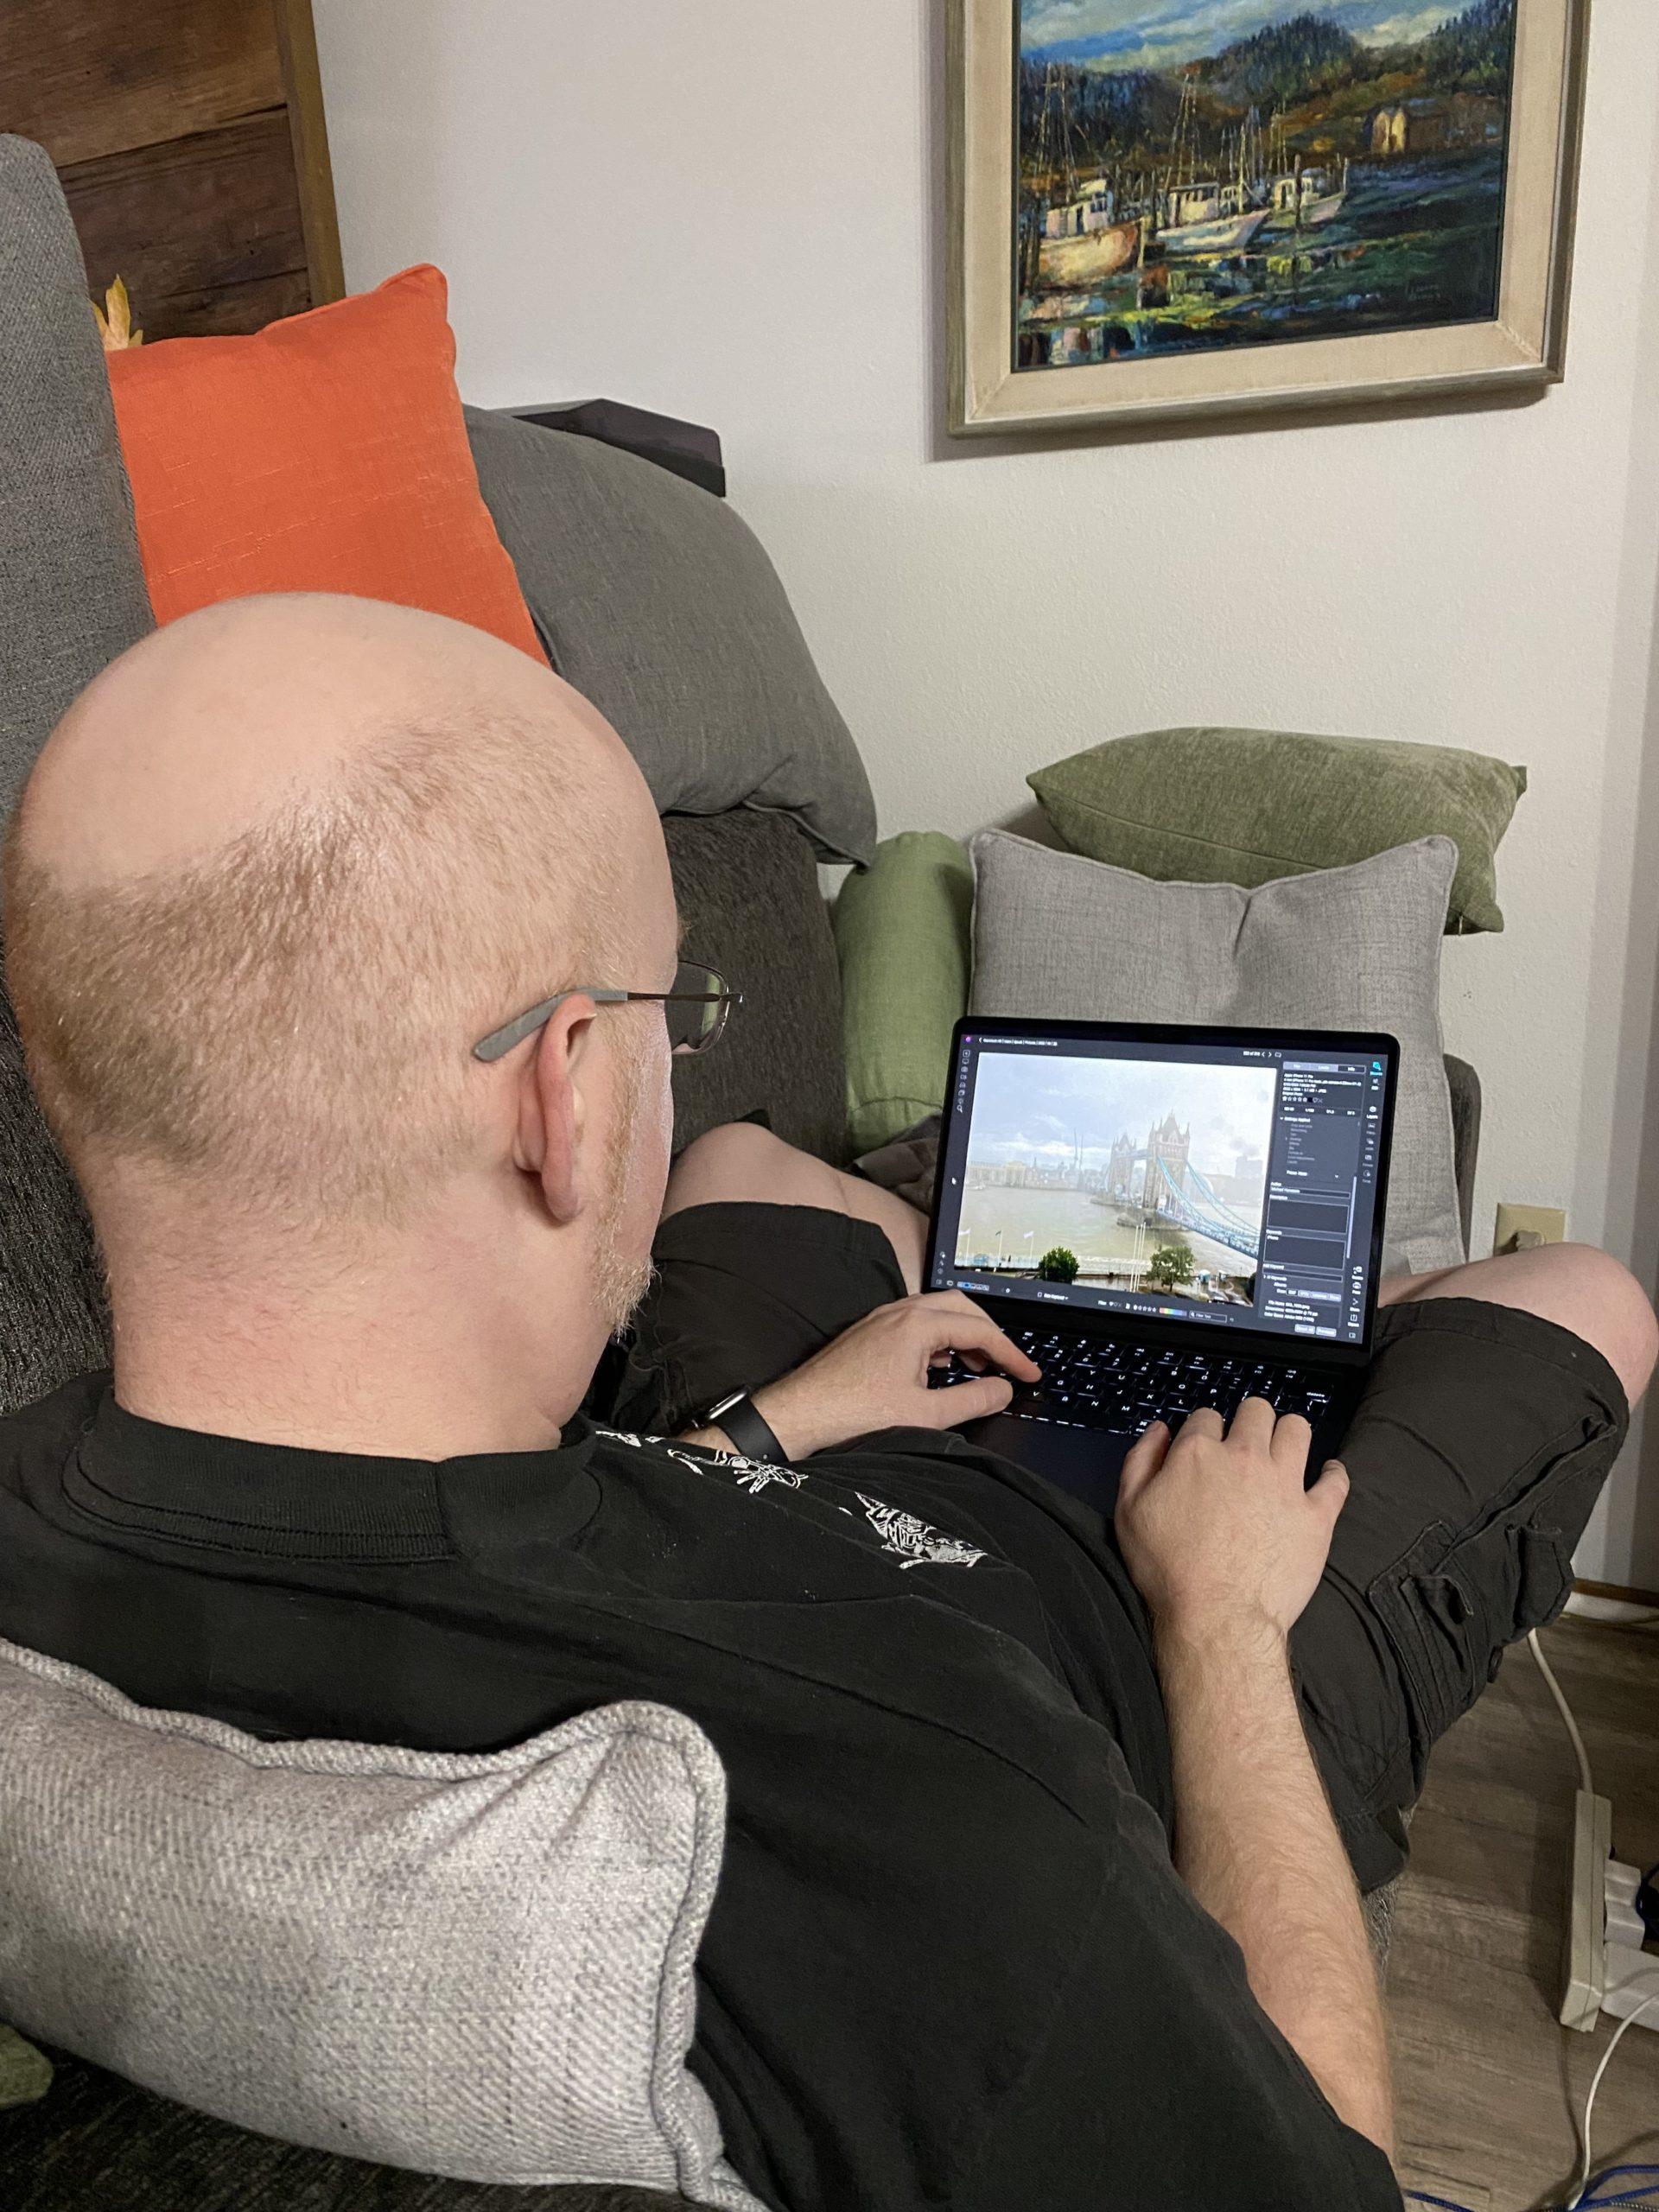 Me from behind, sitting on our couch with my comptuer in my lap, with a photo of London's Tower Bridge visible on the screen.